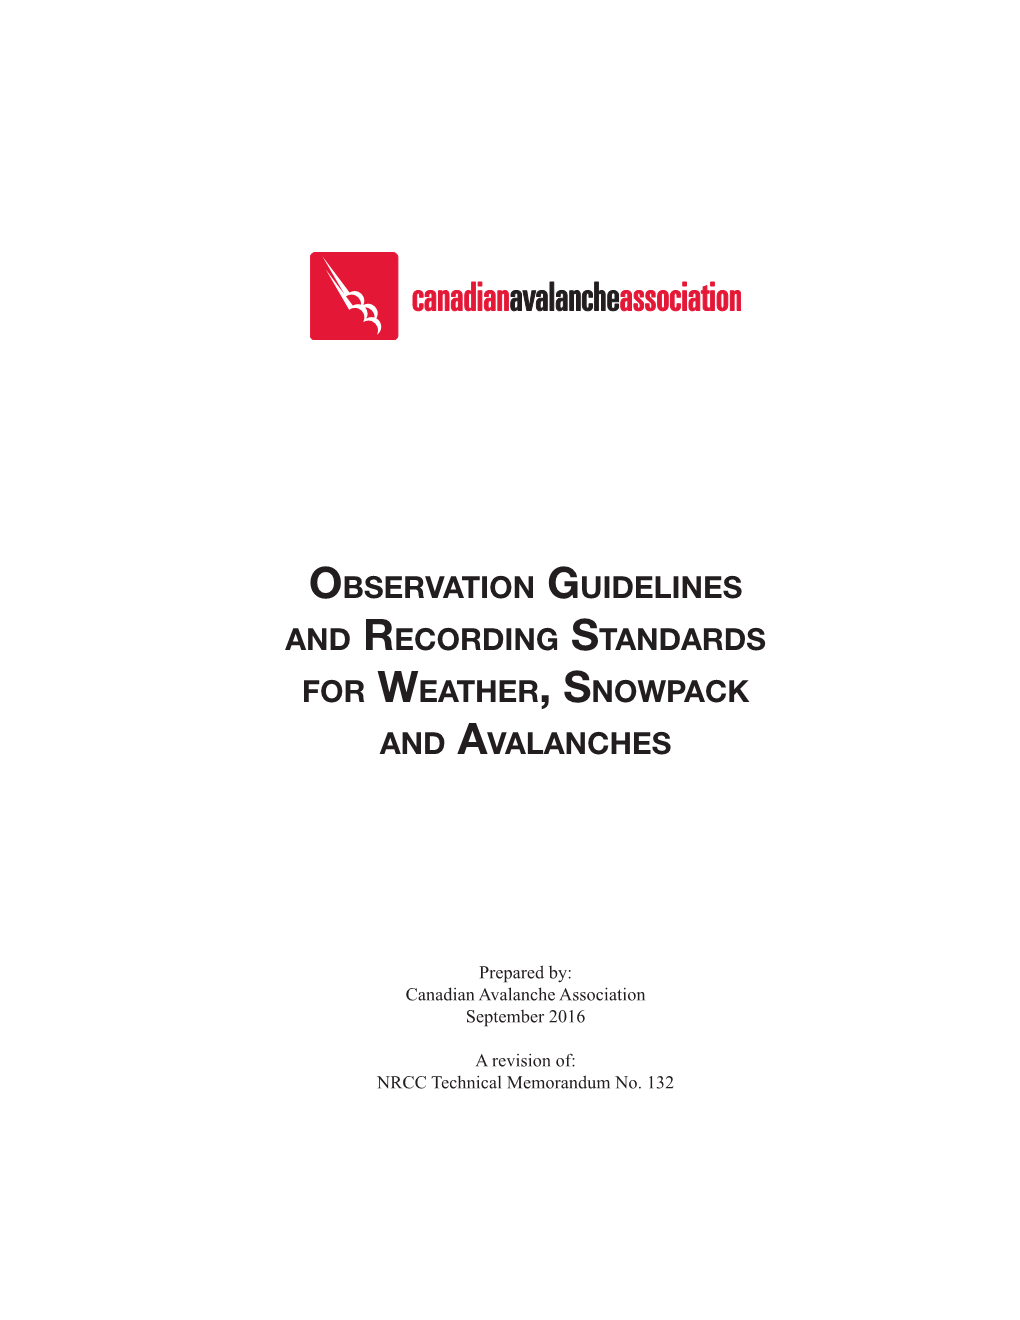 Observation Guidelines and Recording Standards for Weather, Snowpack and Avalanches